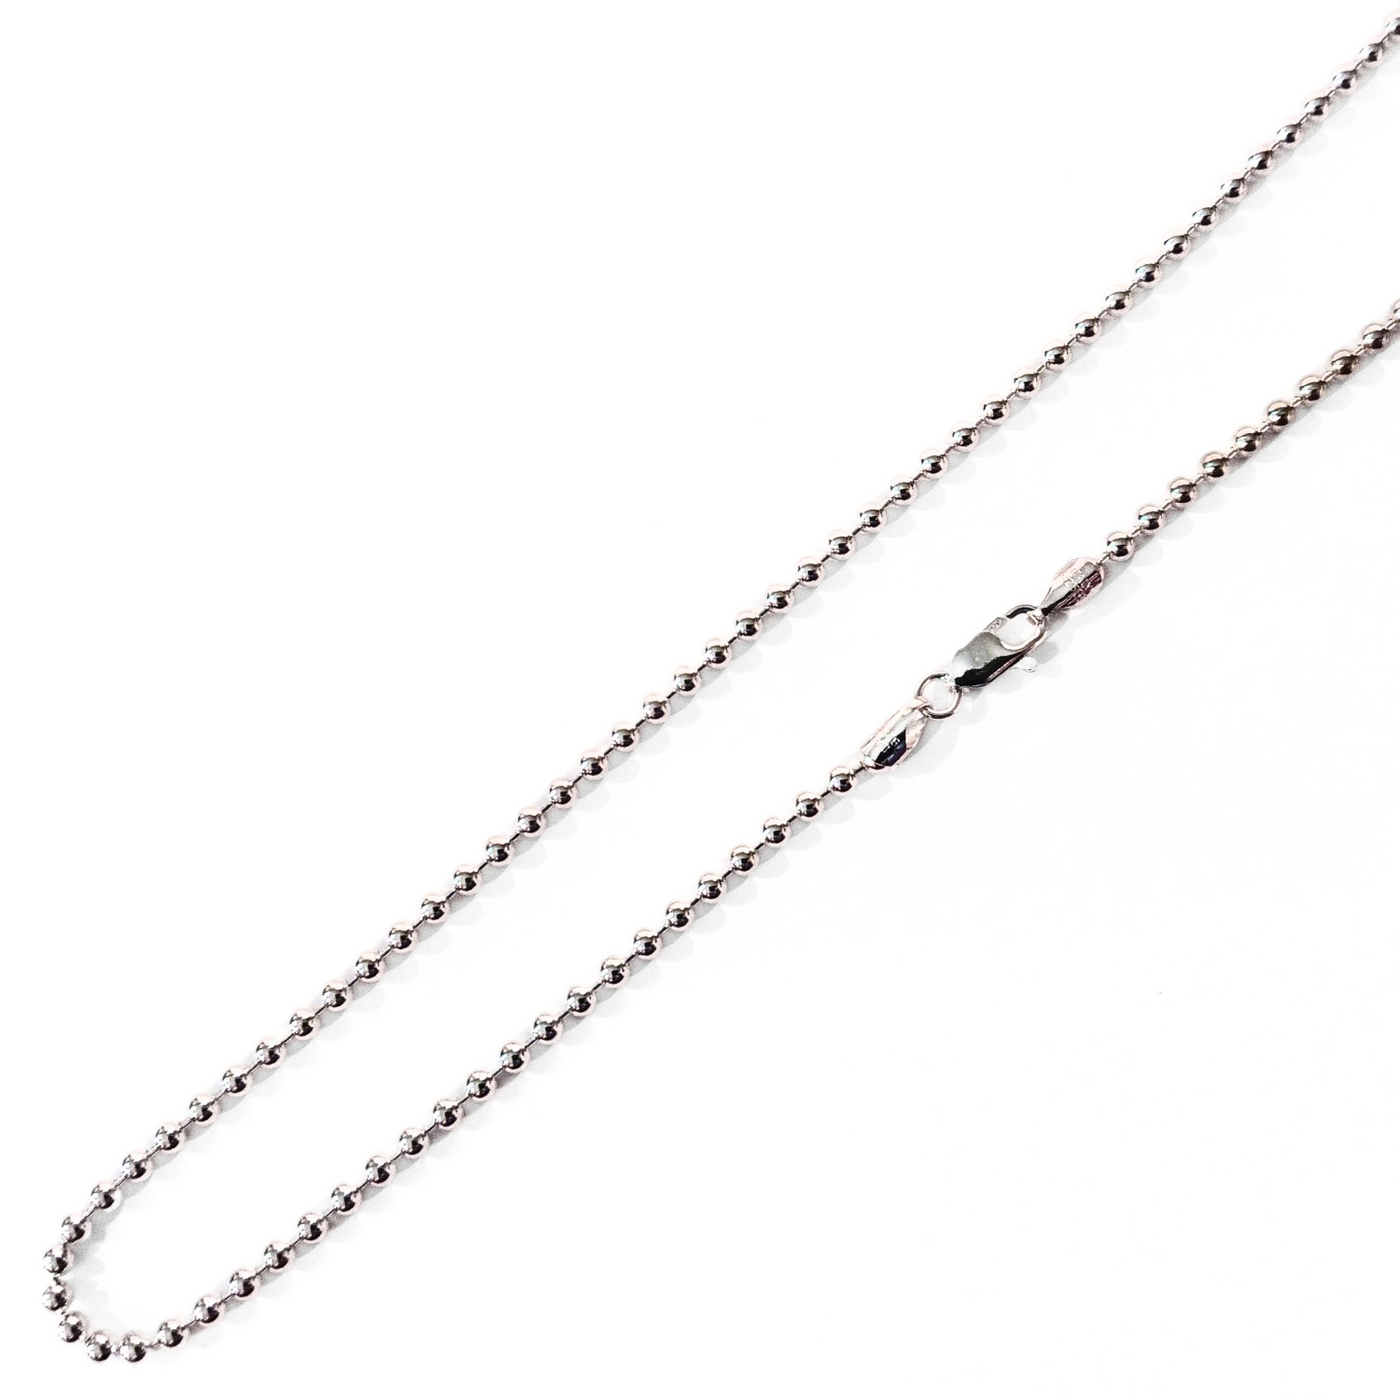 18" 3.0mm Bead Chain (Sterling Silver)